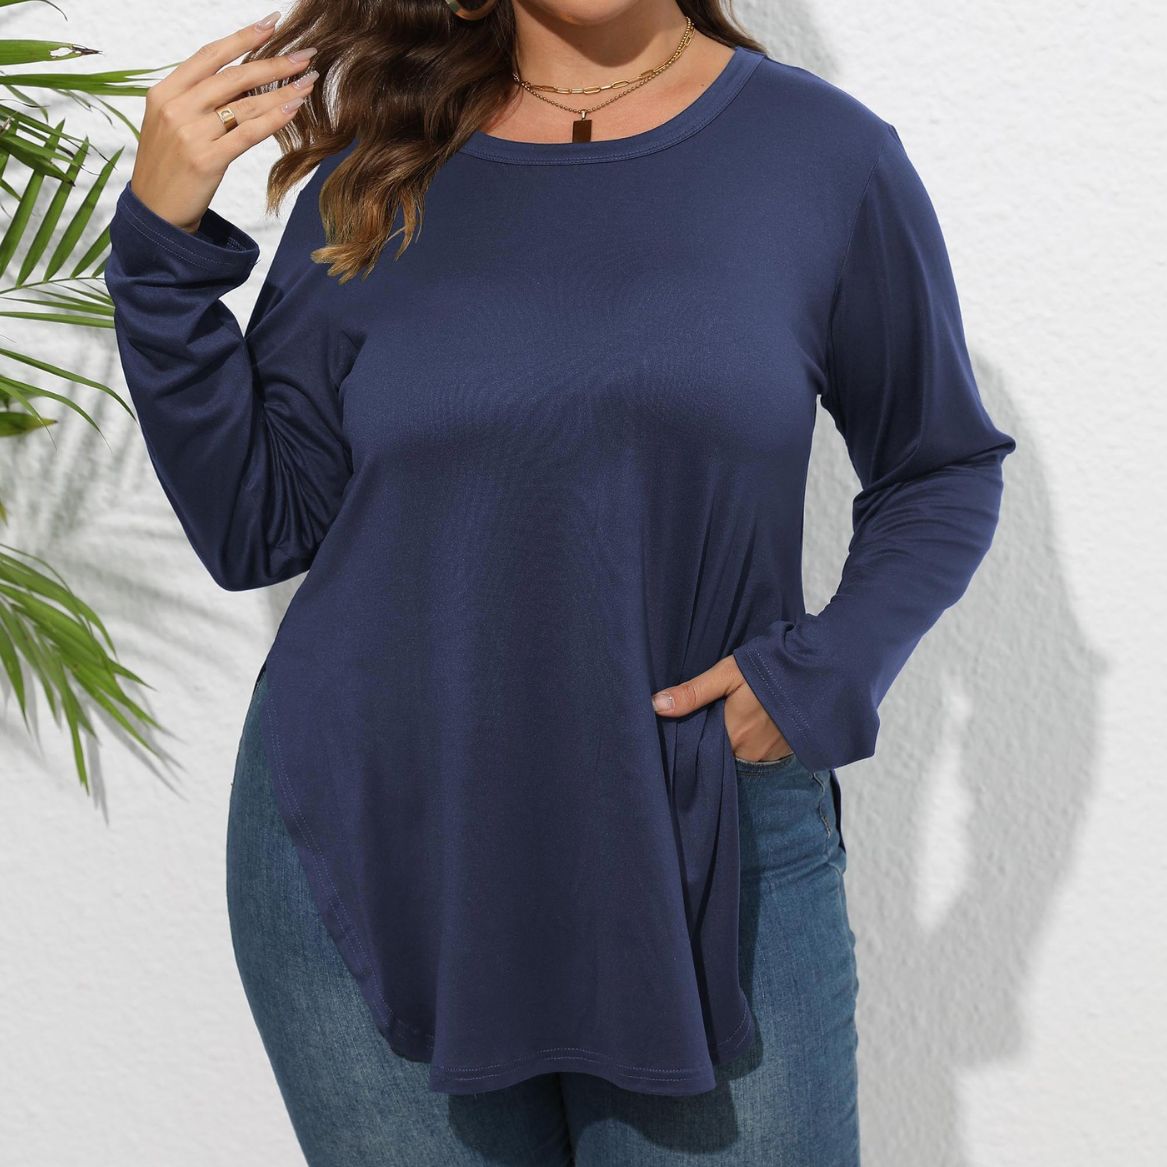 Women Autumn Winter Long Sleeved plus Size Women Clothes Solid Color Casual Irregular Asymmetric T shirt Bottoming Shirt